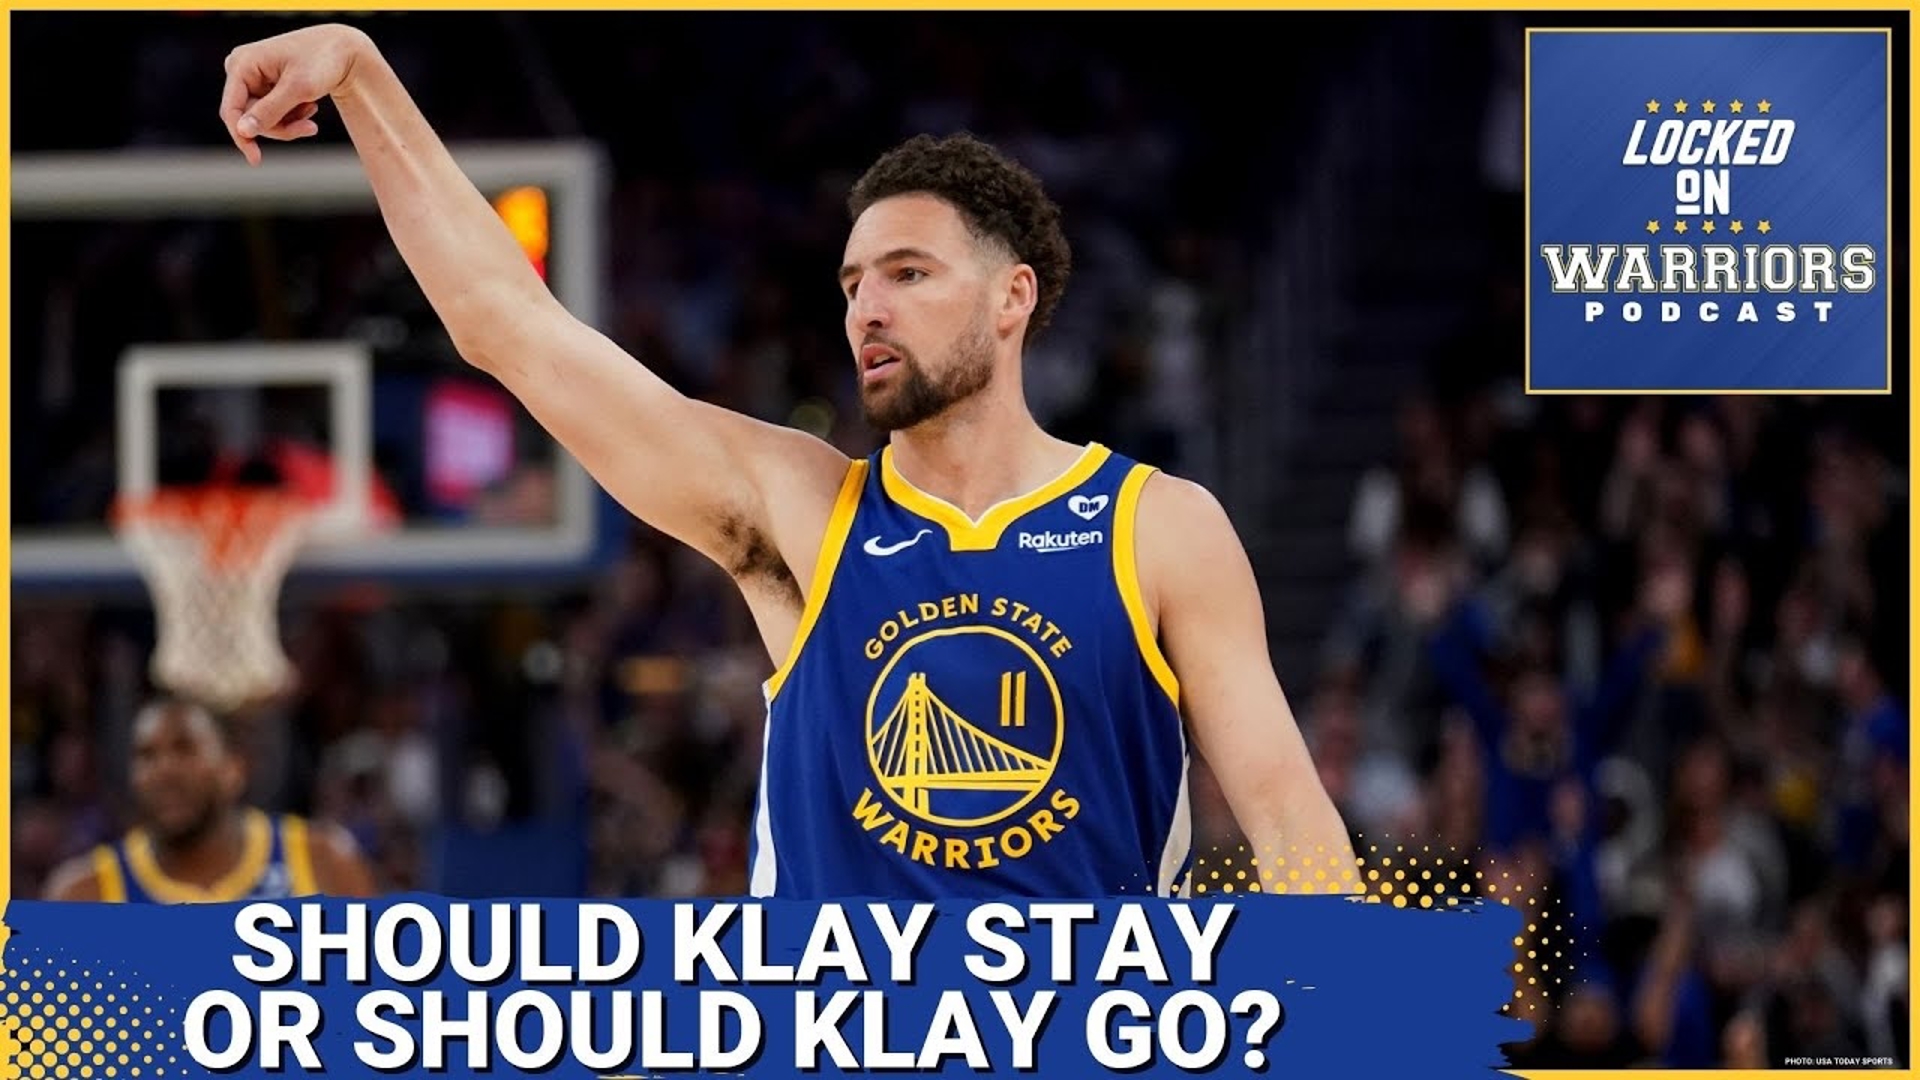 Cyrus Saatsaz discusses one of the Golden State Warriors biggest dilemmas this offseason: What to do with Klay Thompson?